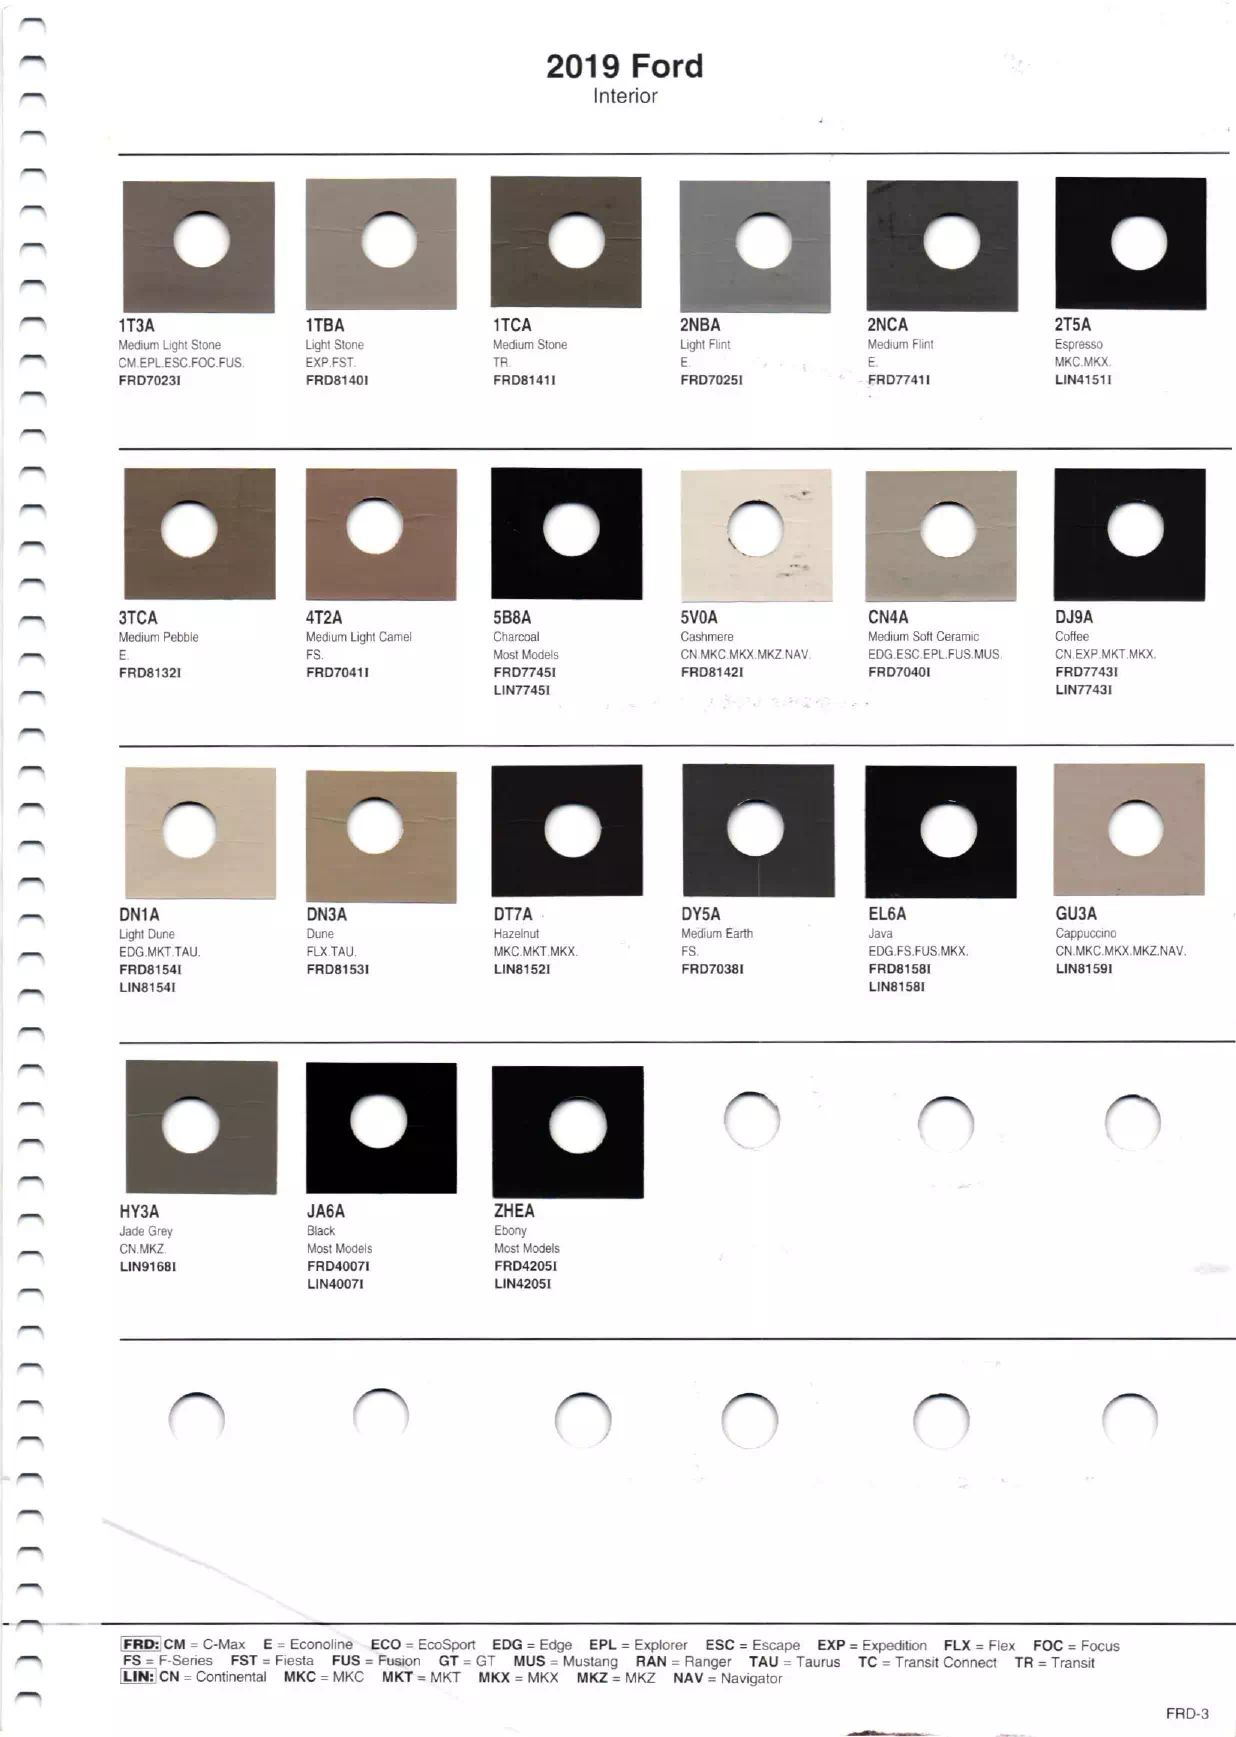 Paint Swatches, Color Names and Ordering Codes for Ford Motor Company (Ford and Lincoln Vehicles) in 2019